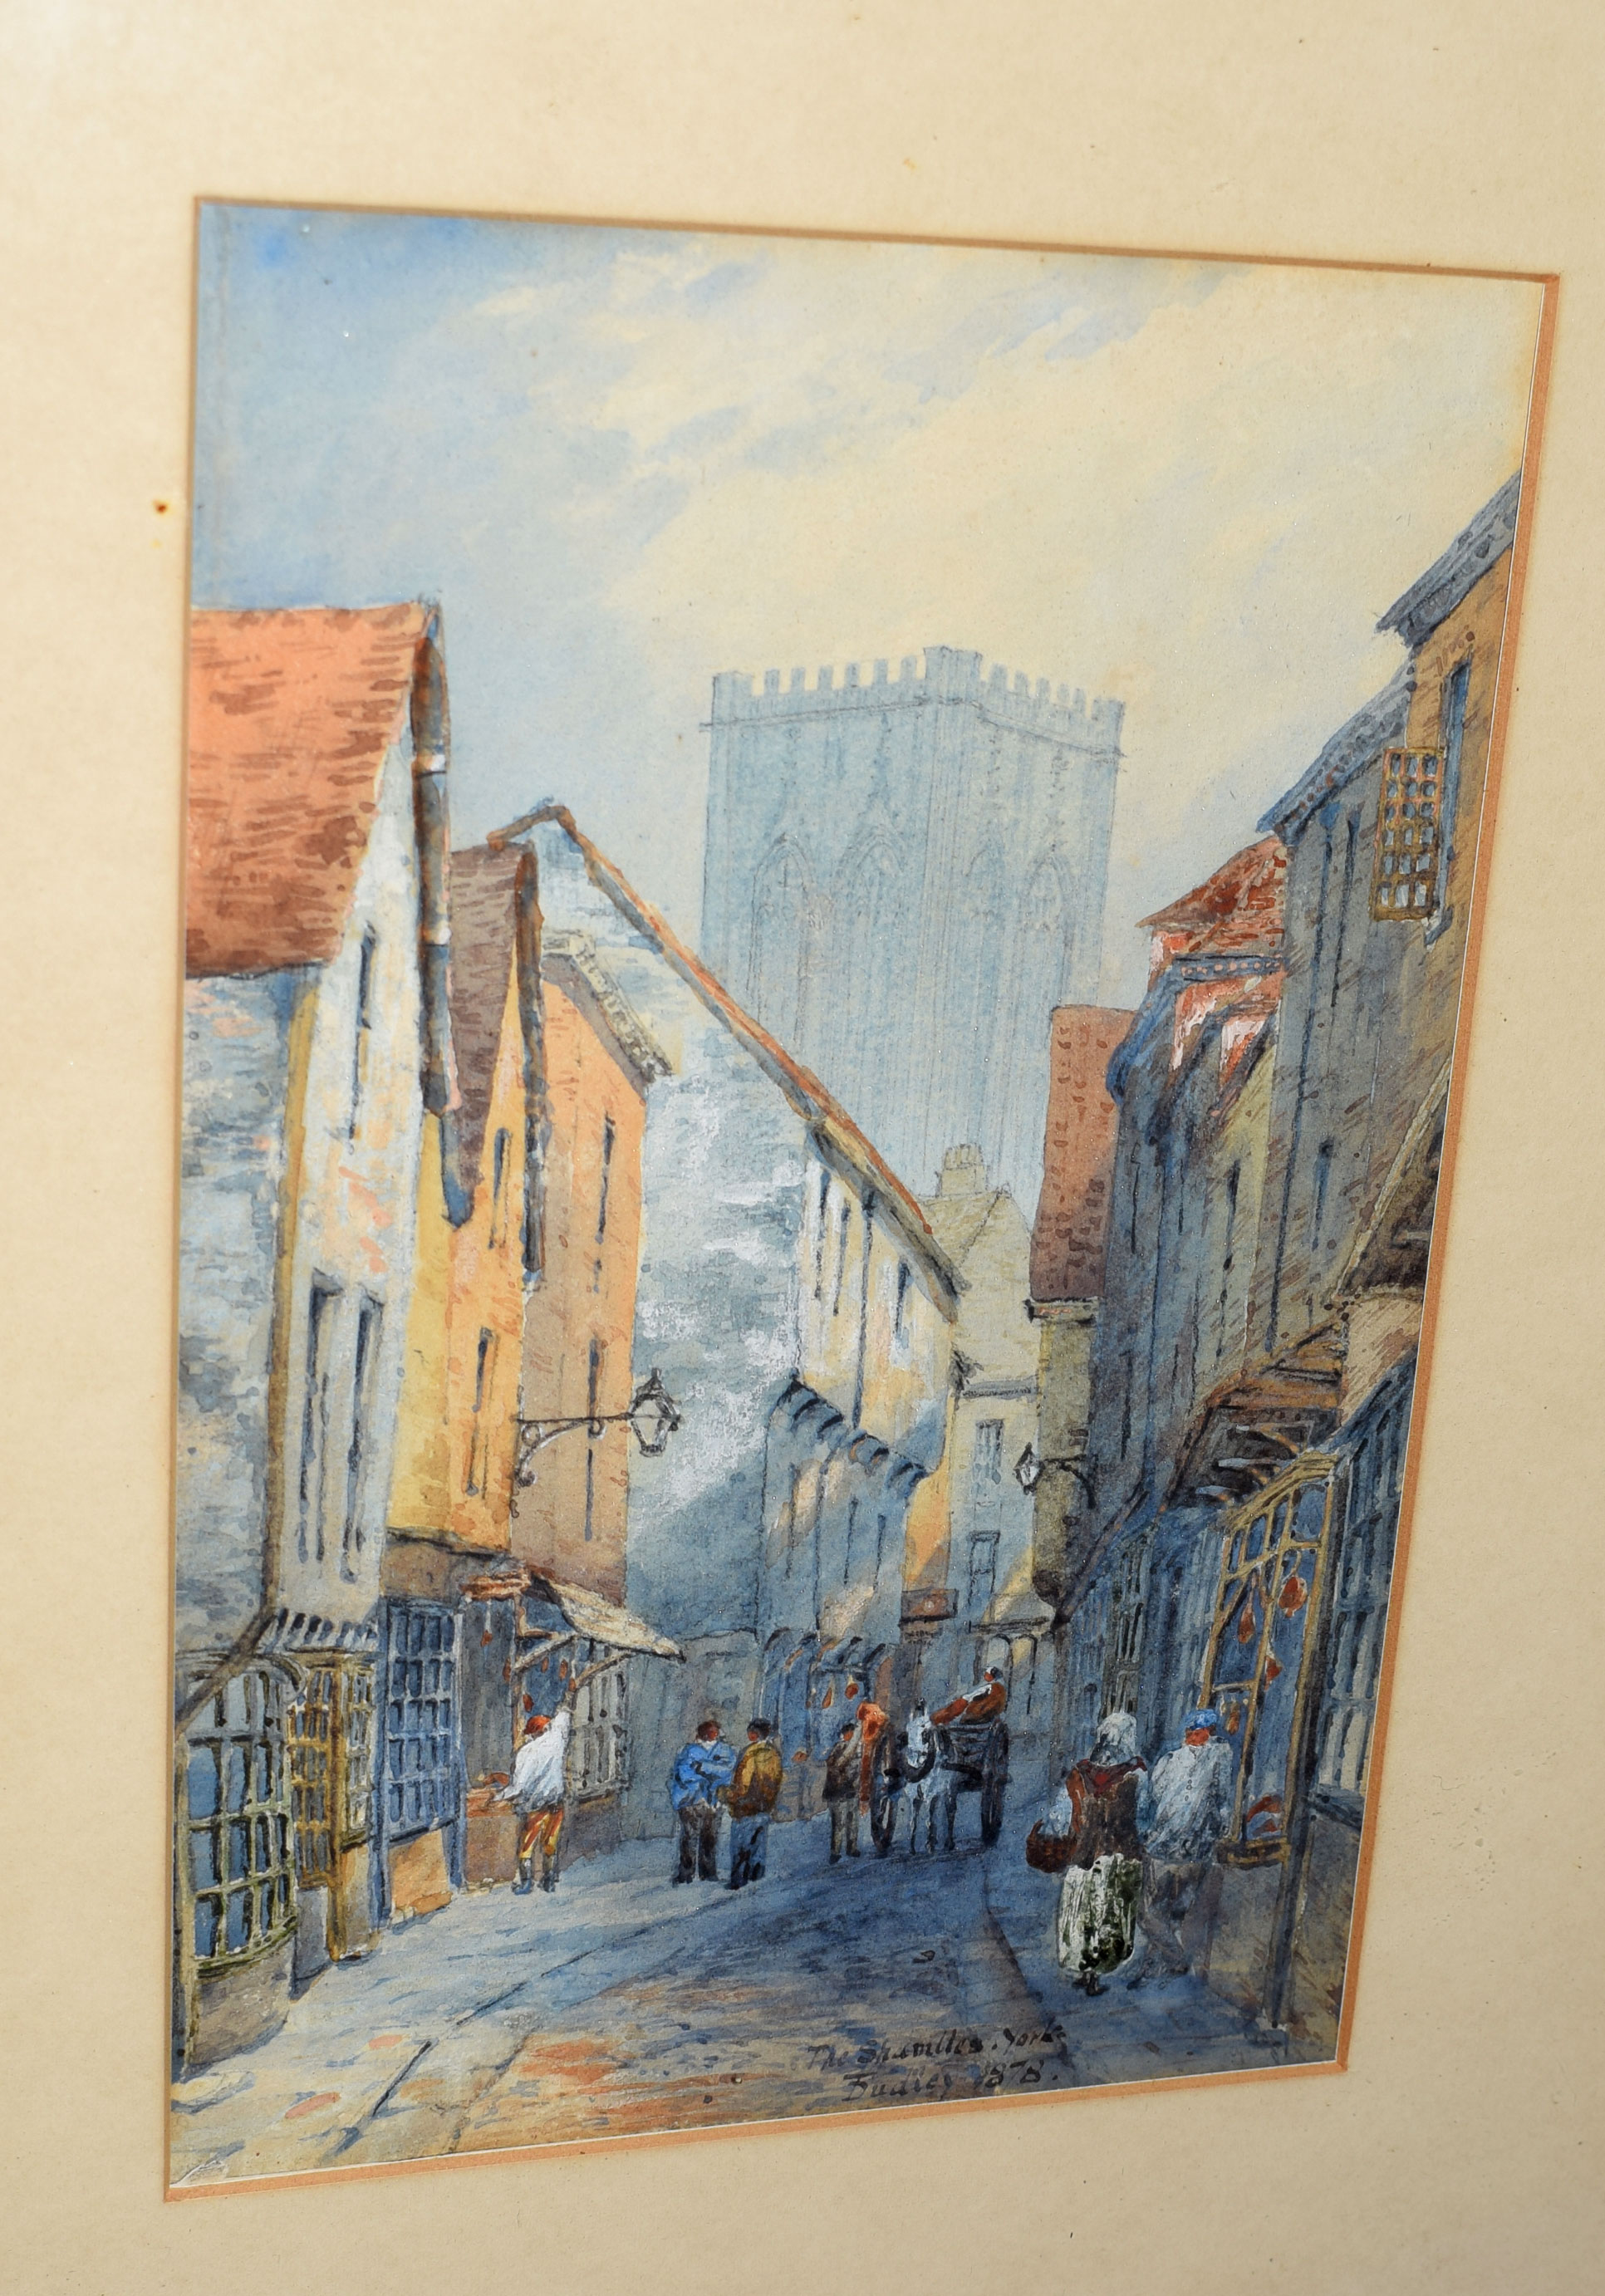 Thomas Dudley (1857-1935), 'New Gate, York' & 'The Shambles, York', pair of watercolours, both - Image 2 of 2